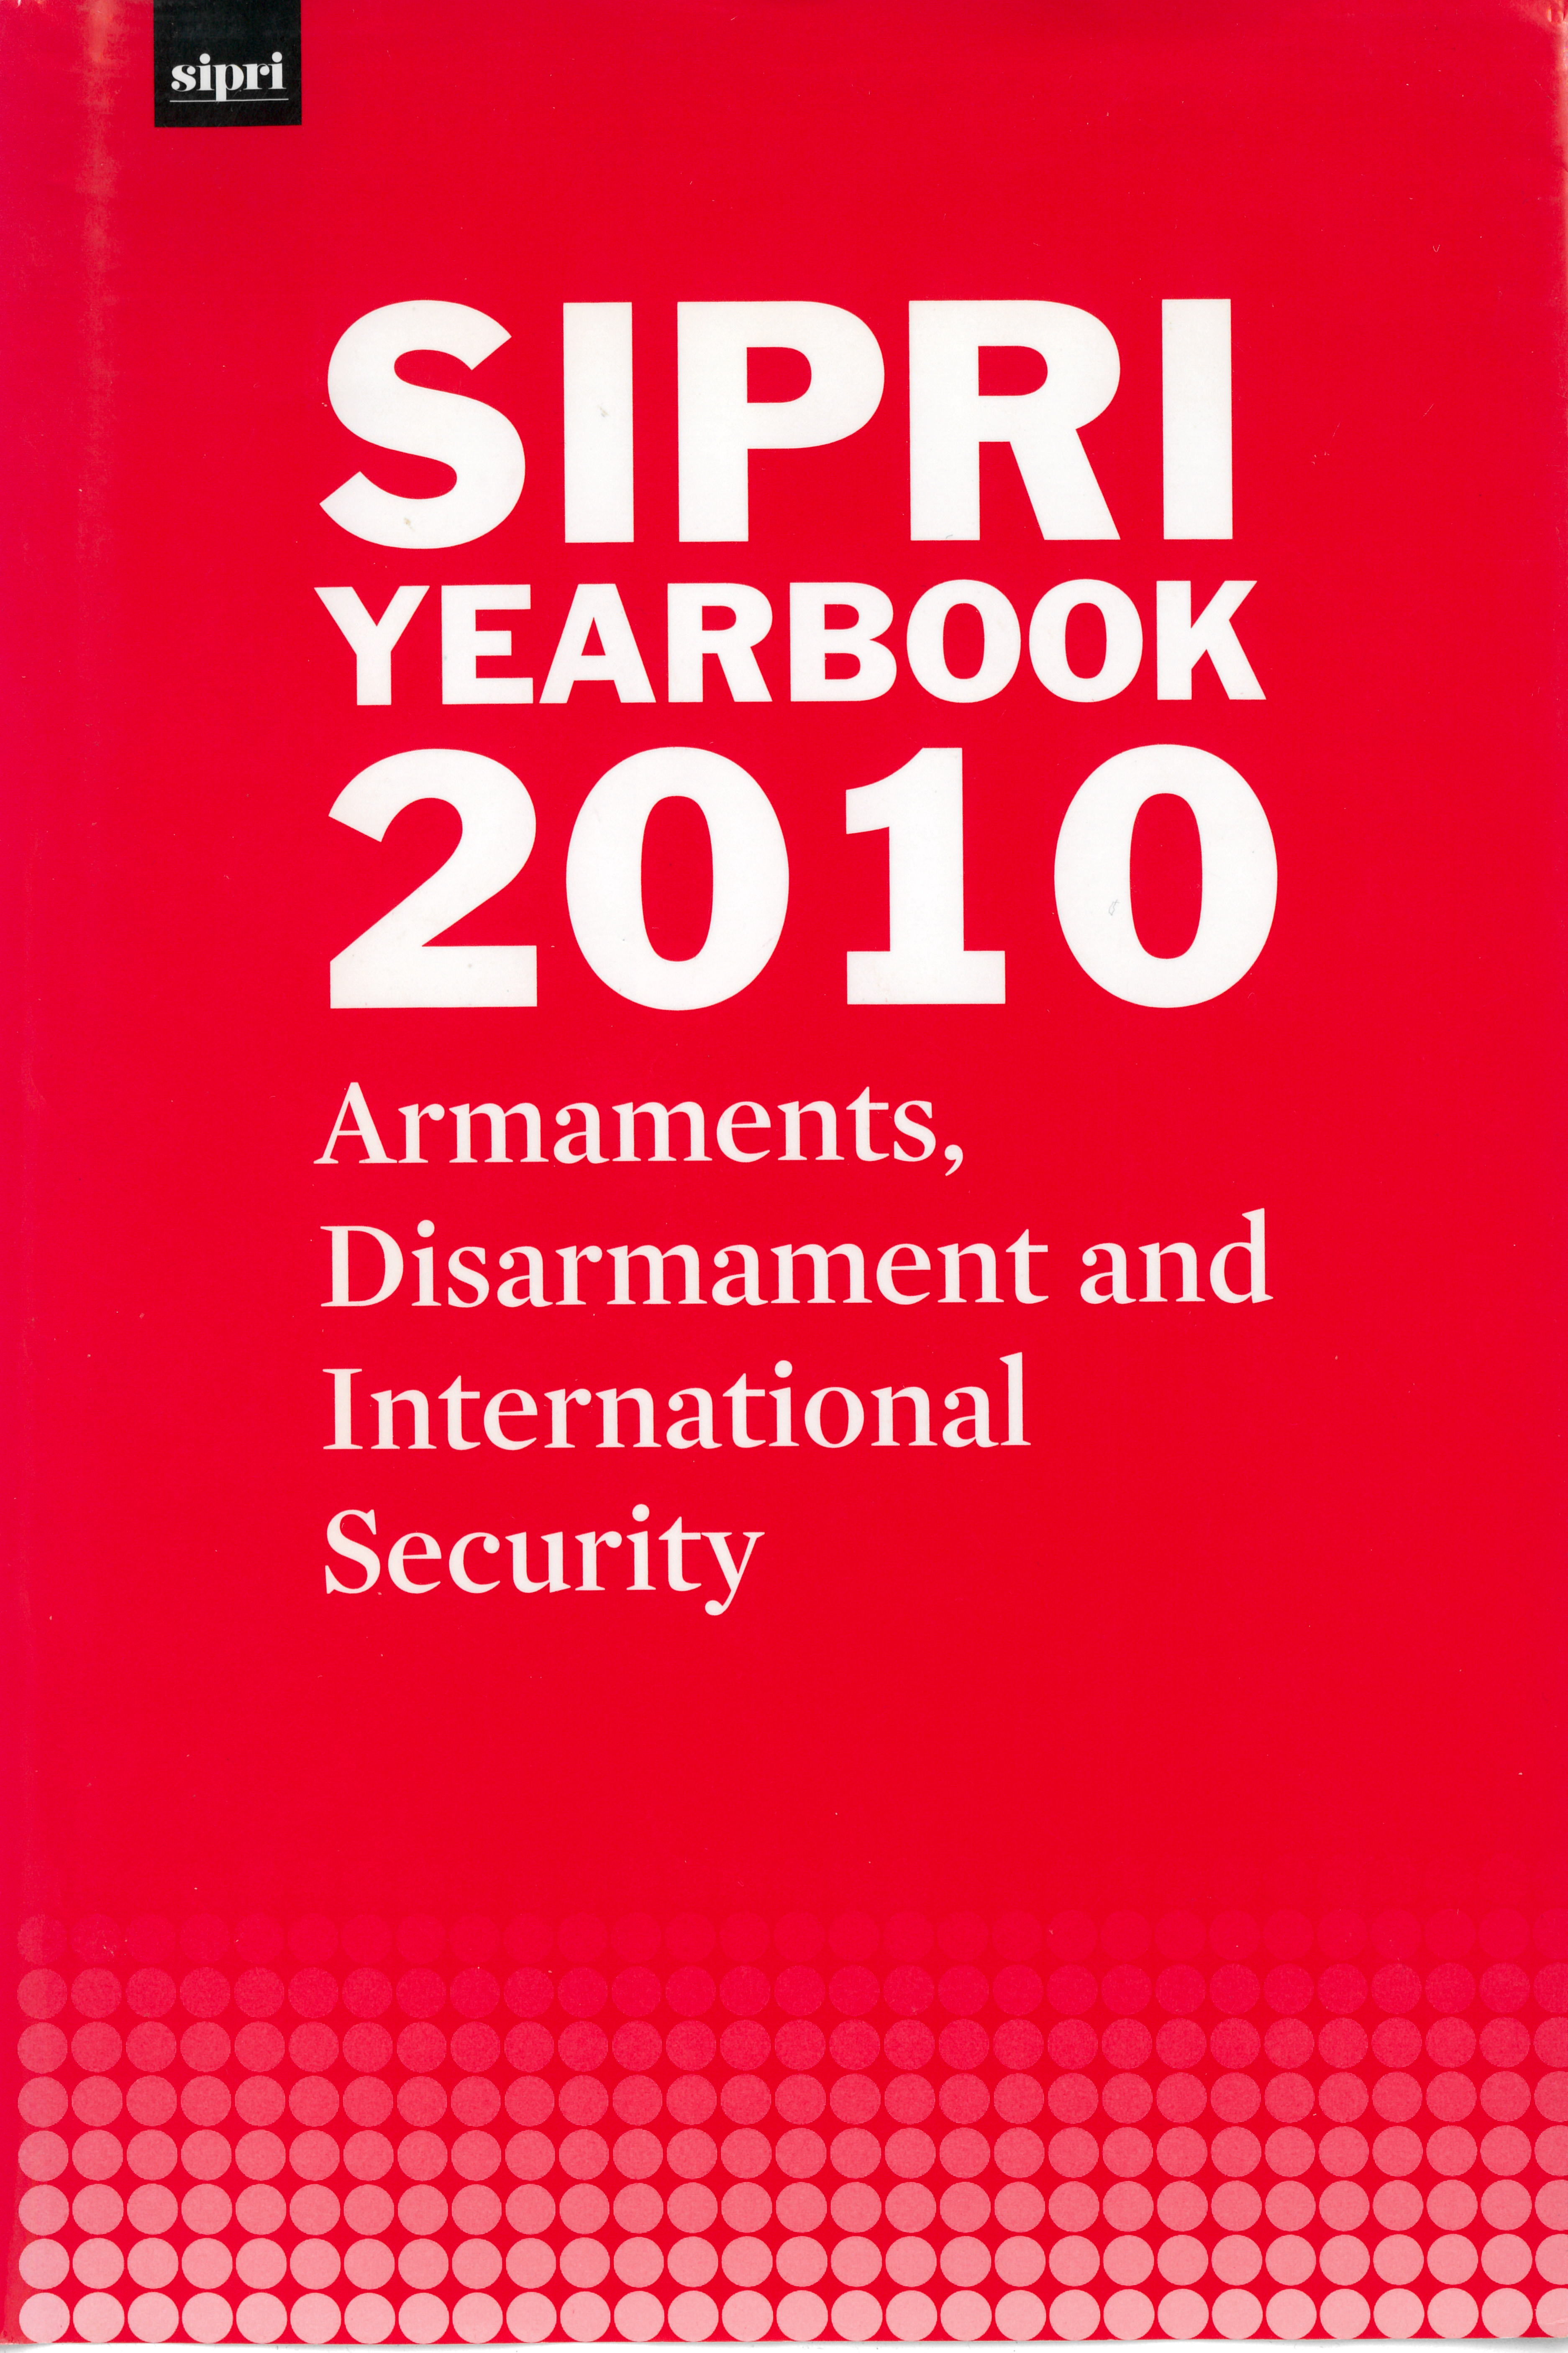 SIPRI yearbook 2010 cover